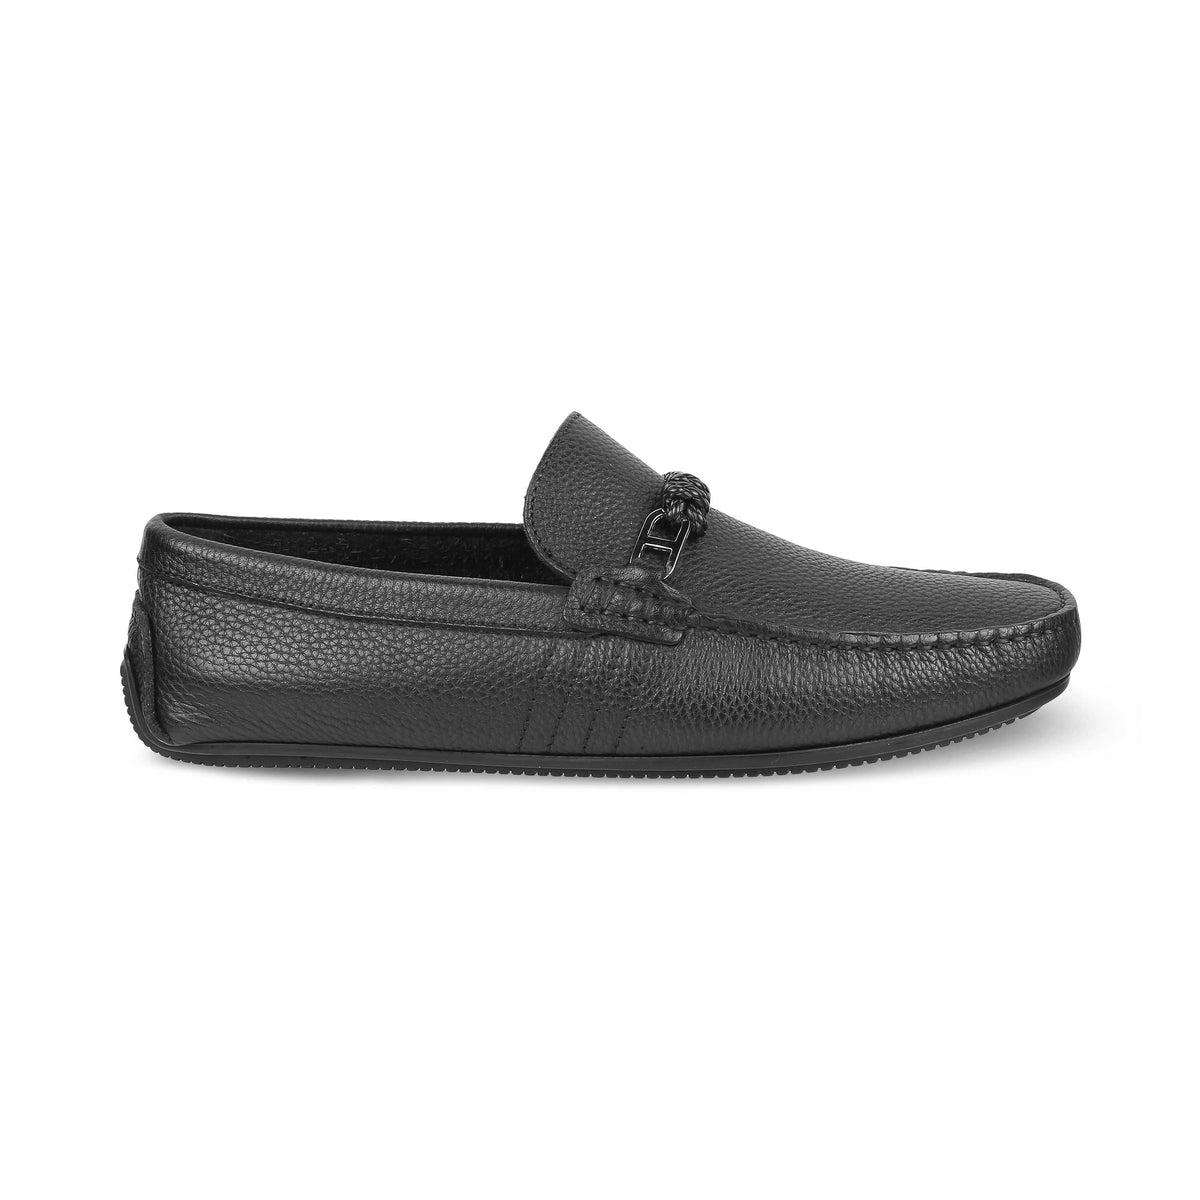 Tresmode Monoc Black Men's Leather Driving Loafers - Tresmode